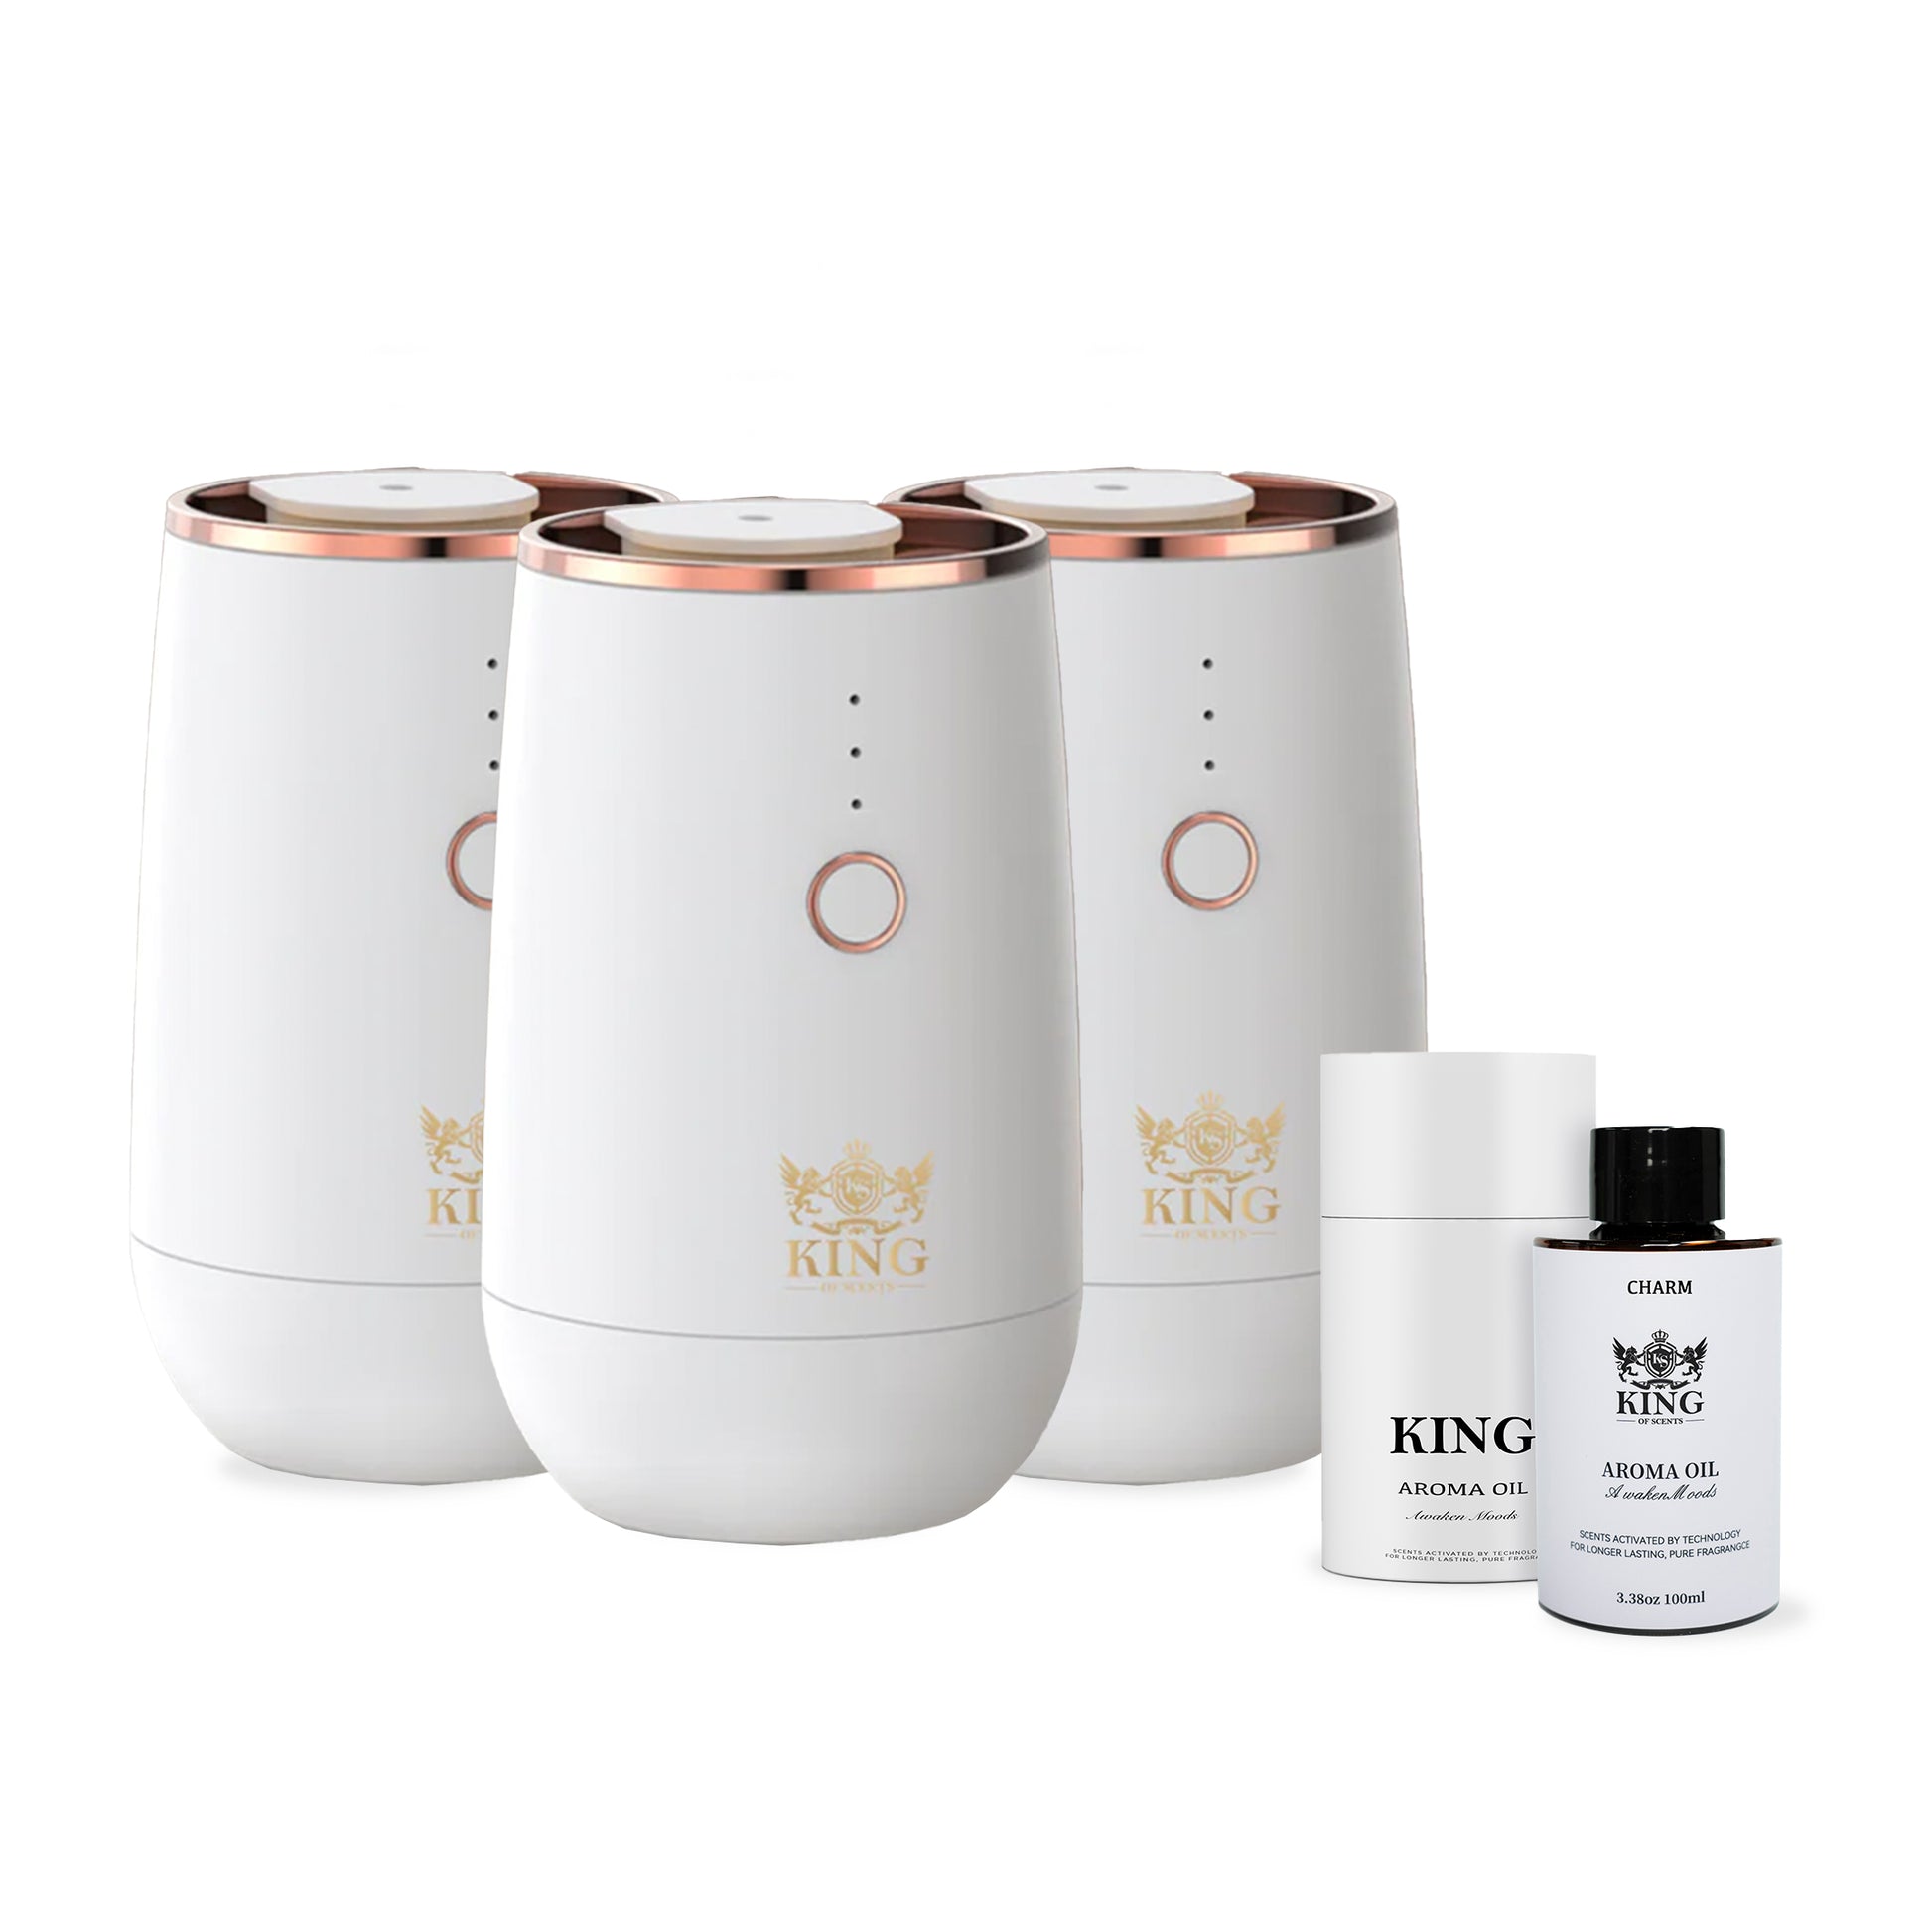 Diffusing Essential oils with The Nebulizing Diffuser  it's like a dream  come true!